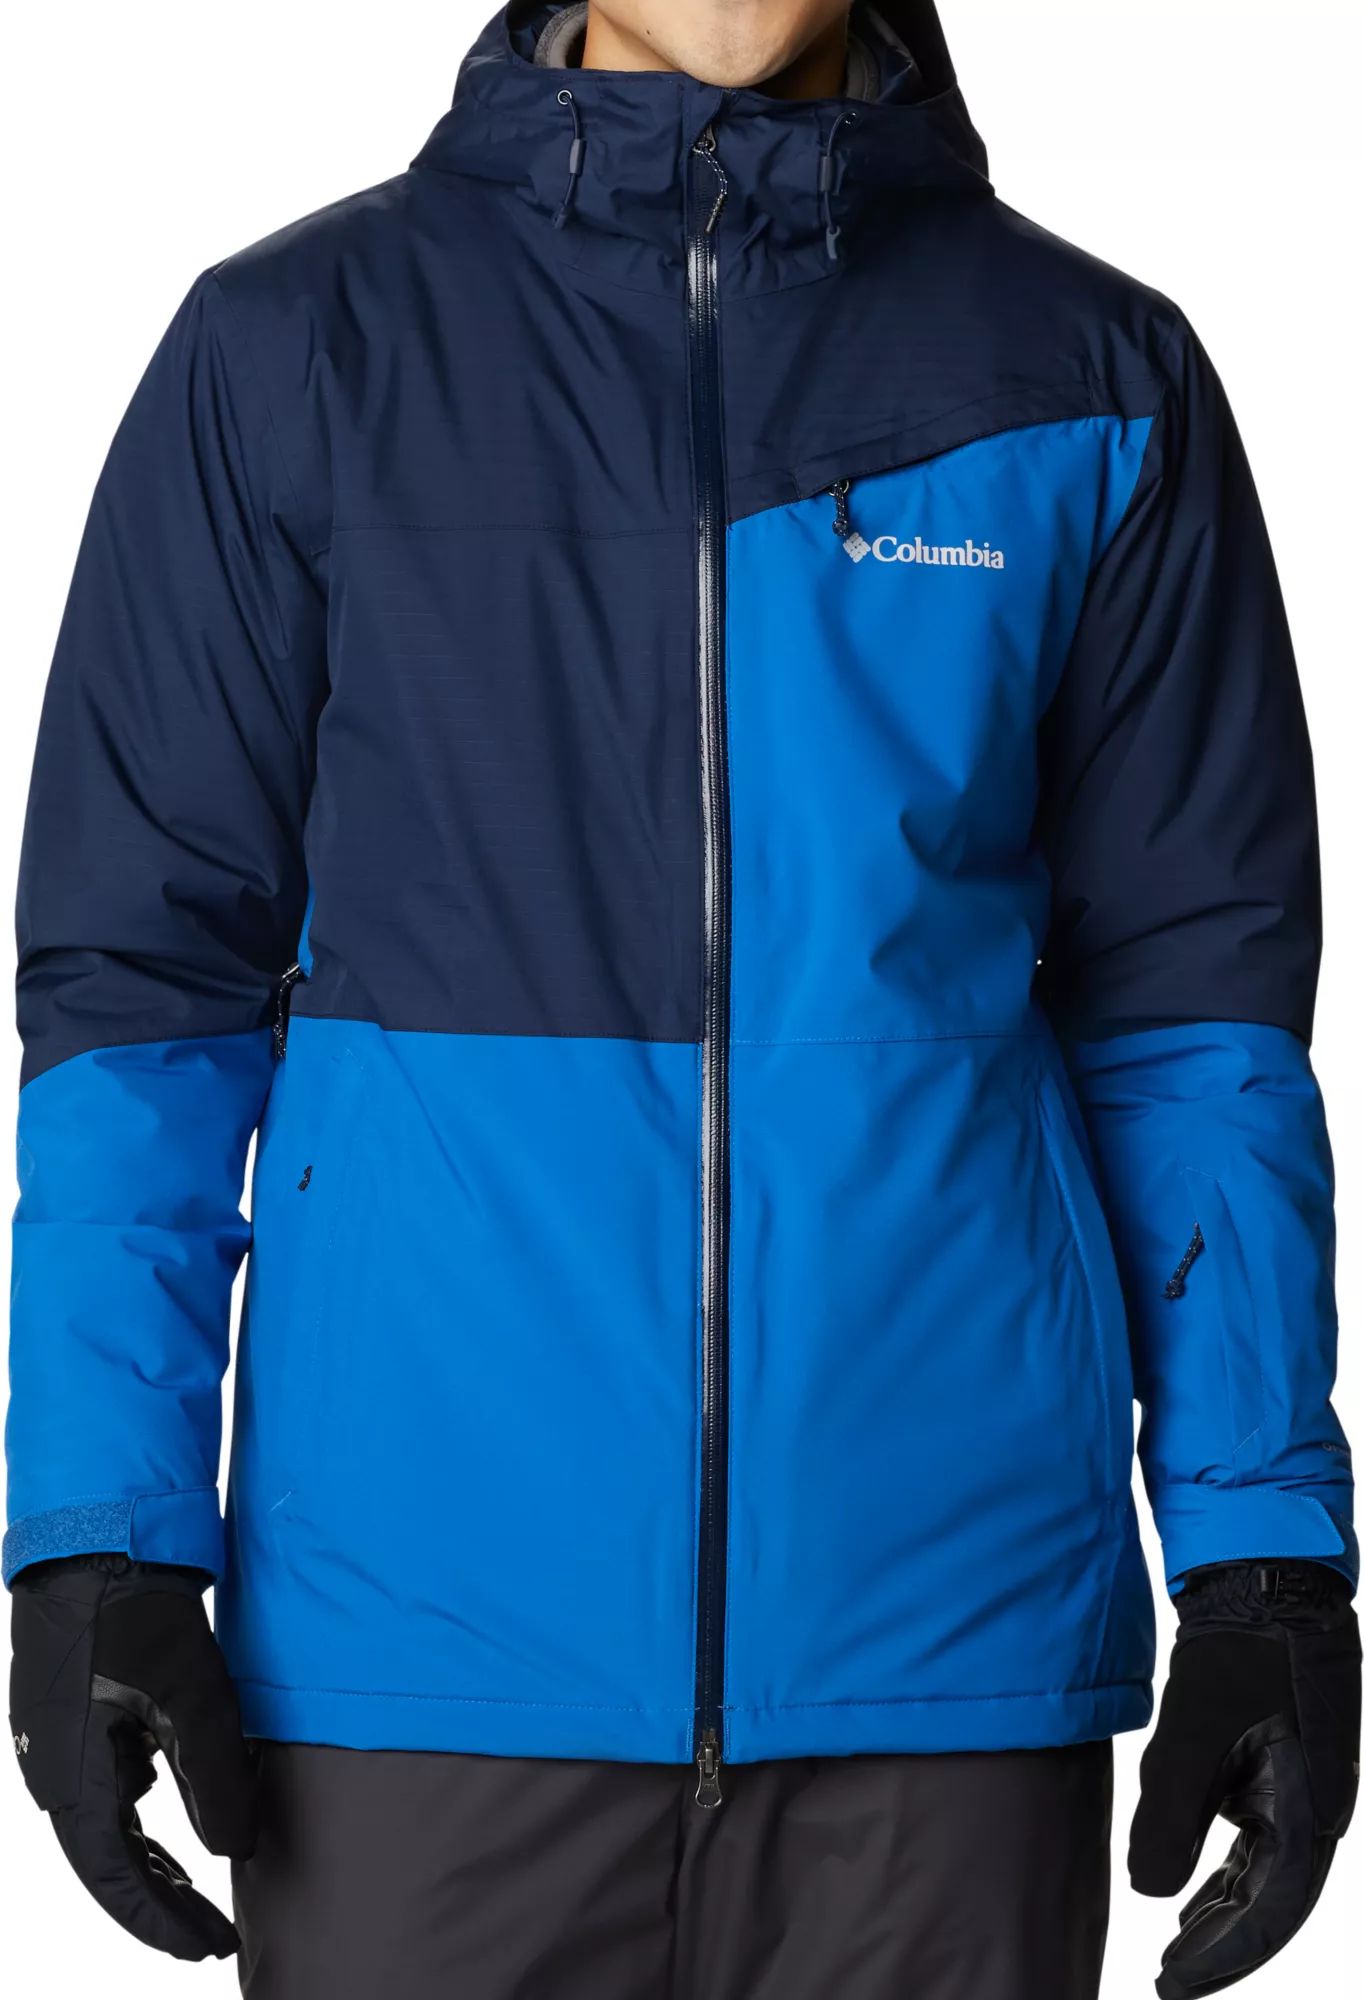 Columbia Men's Iceberg Point Jacket, Small, Brght Indigo/Cllgte Nvy | Dick's Sporting Goods